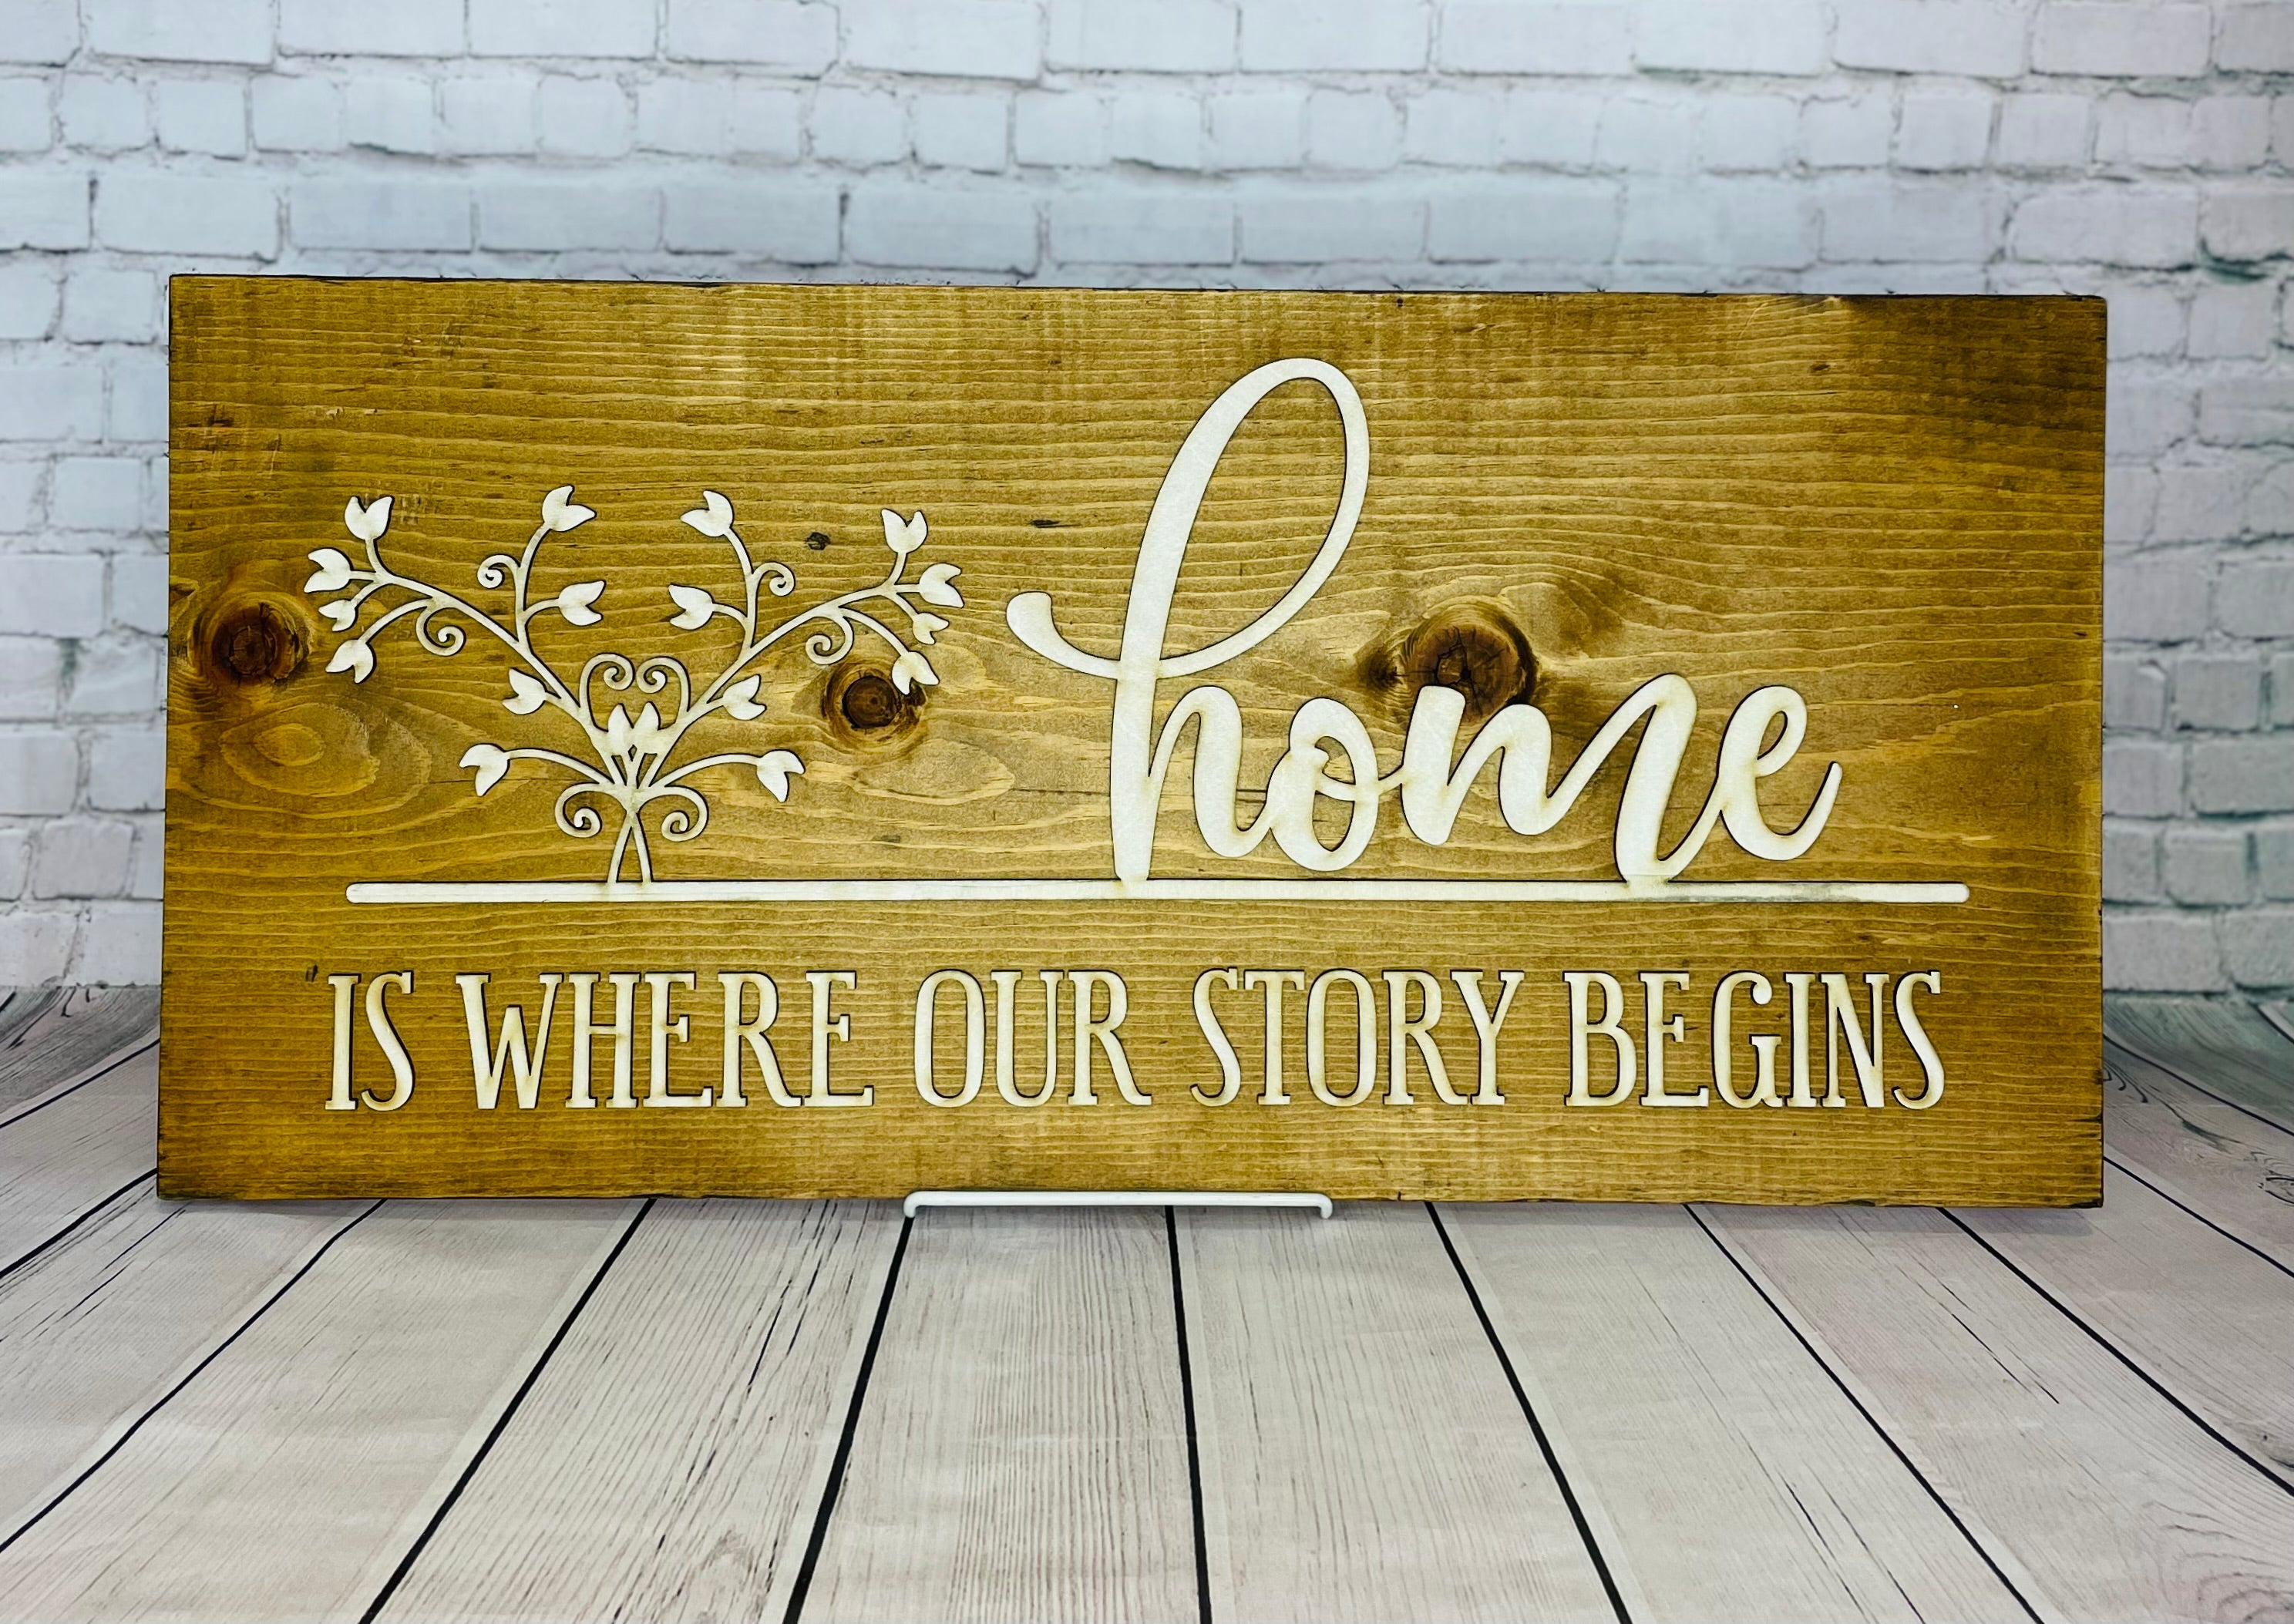 The Home Is Where Our Story Begins